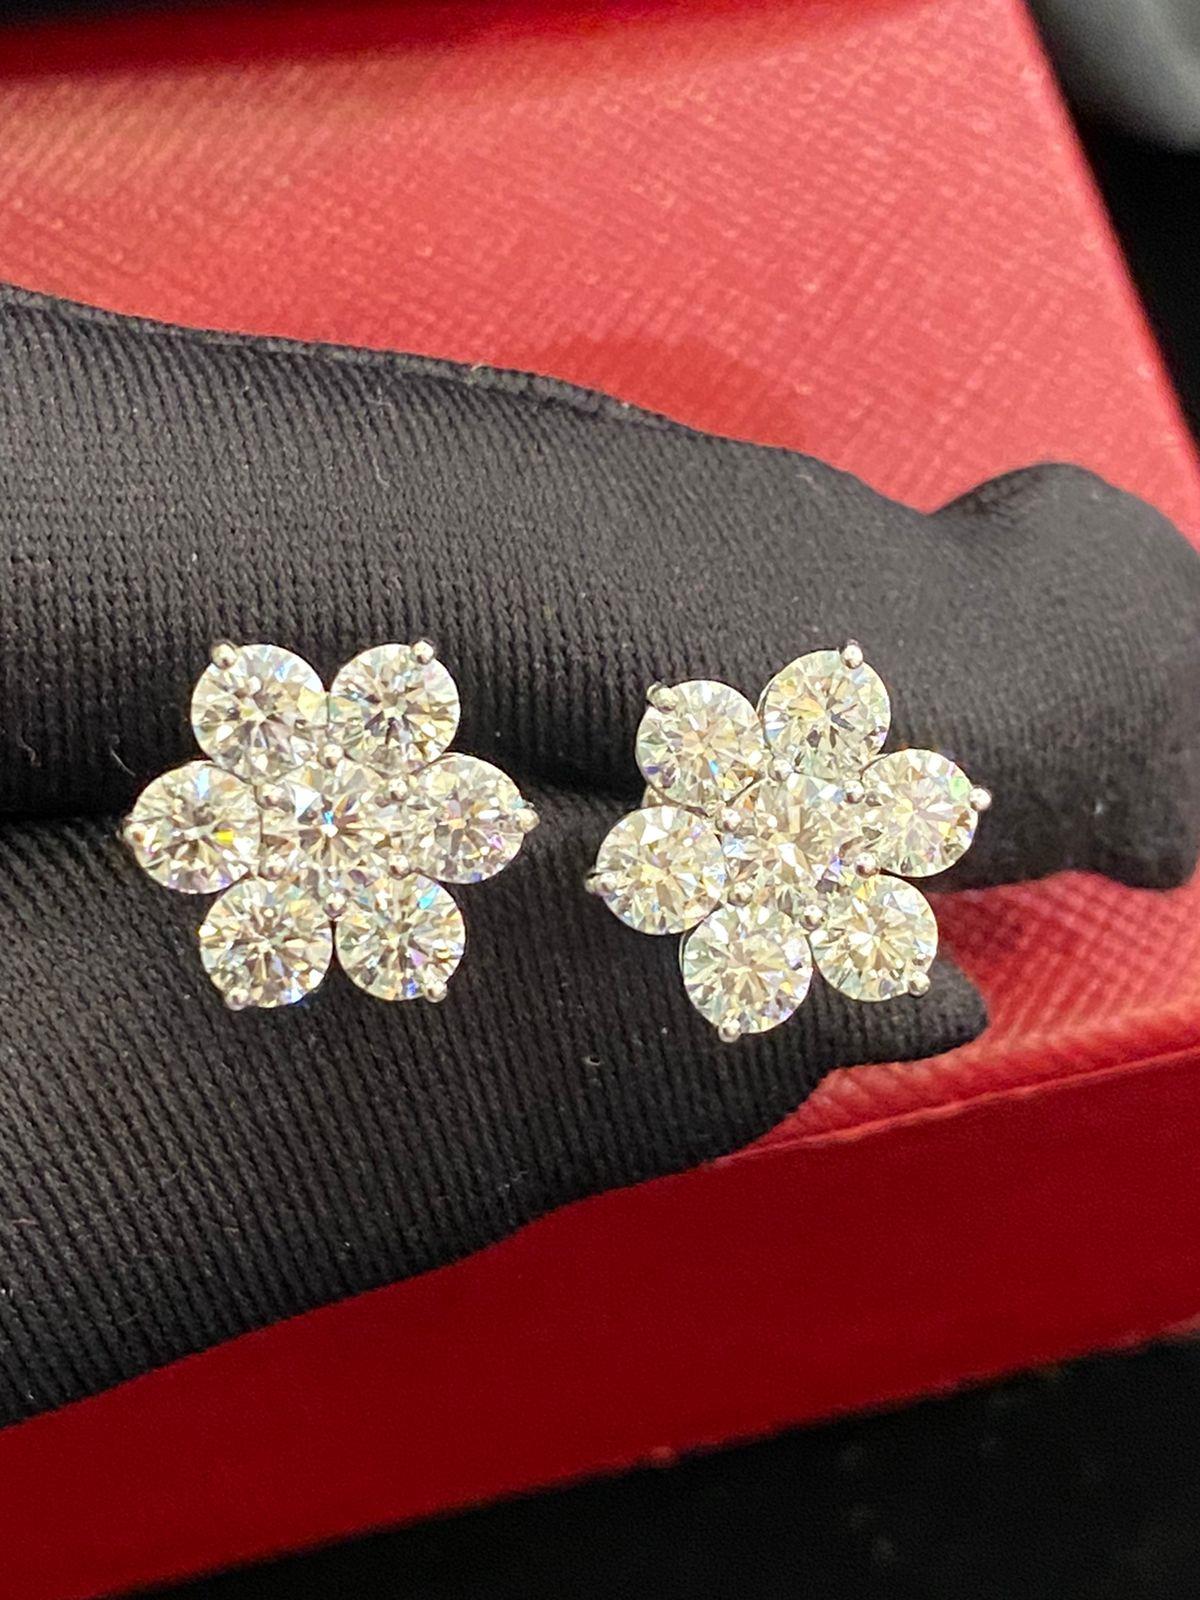 An exquisite flowers 🌺 design for this amazing earrings in 18k gold with 14 pieces of natural round brilliant cut diamonds 4,40 ct F/VS1
( top quality). 
Handcrafted by artisan goldsmith.
Excellent manufacture and quality.